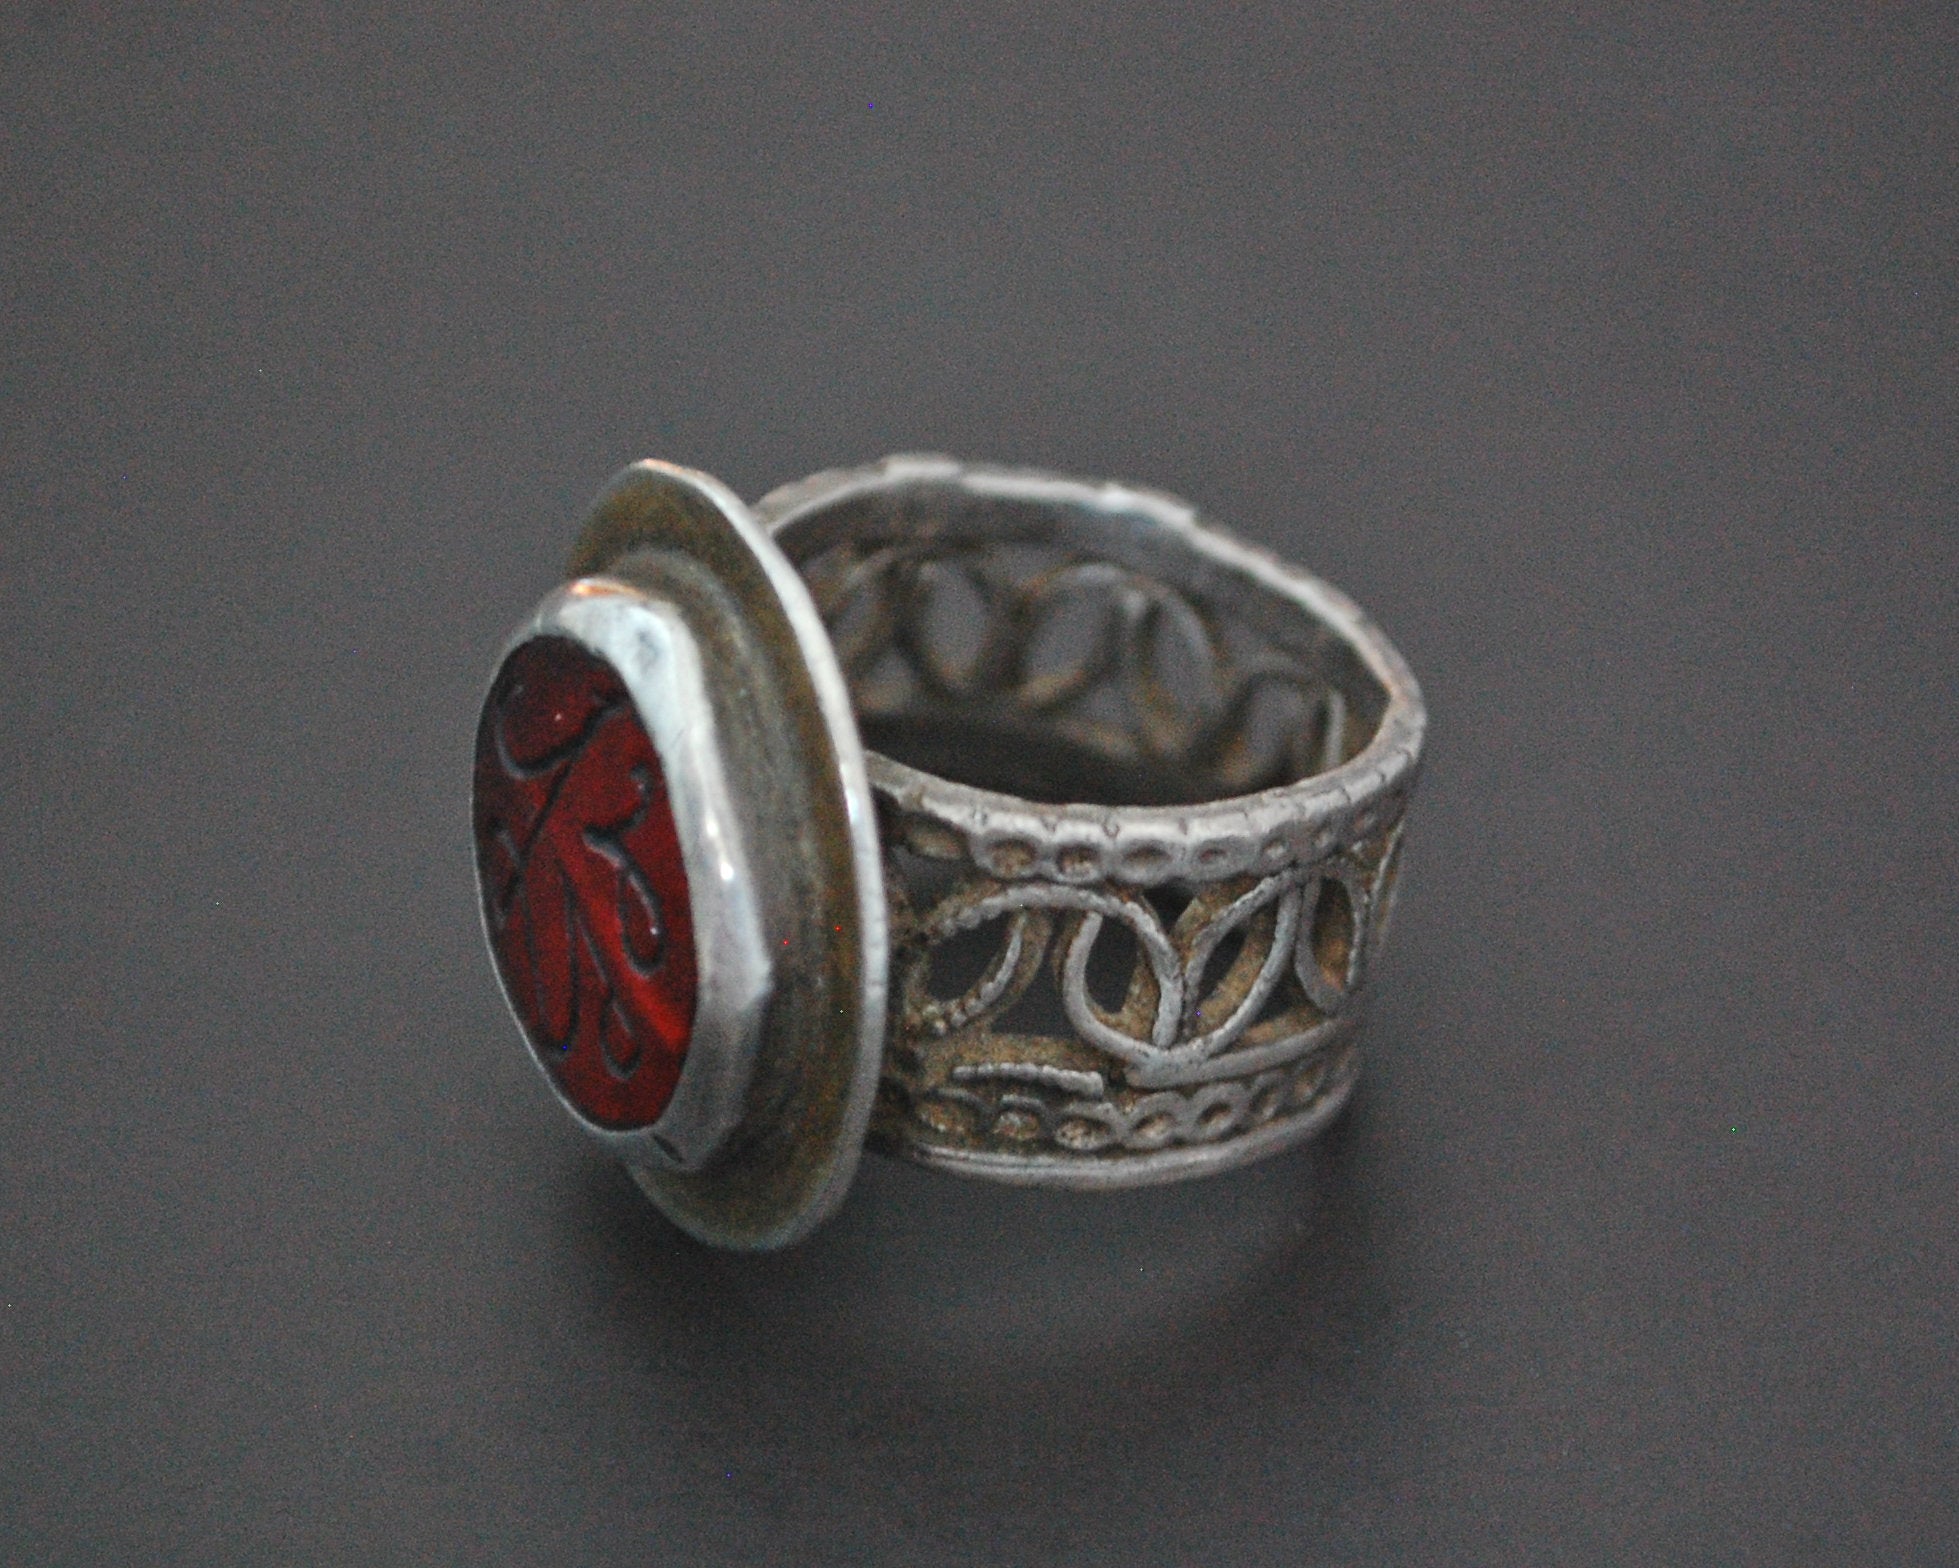 Afghani Silver Ring with Red Glass and Ornate Band - Size 7.5